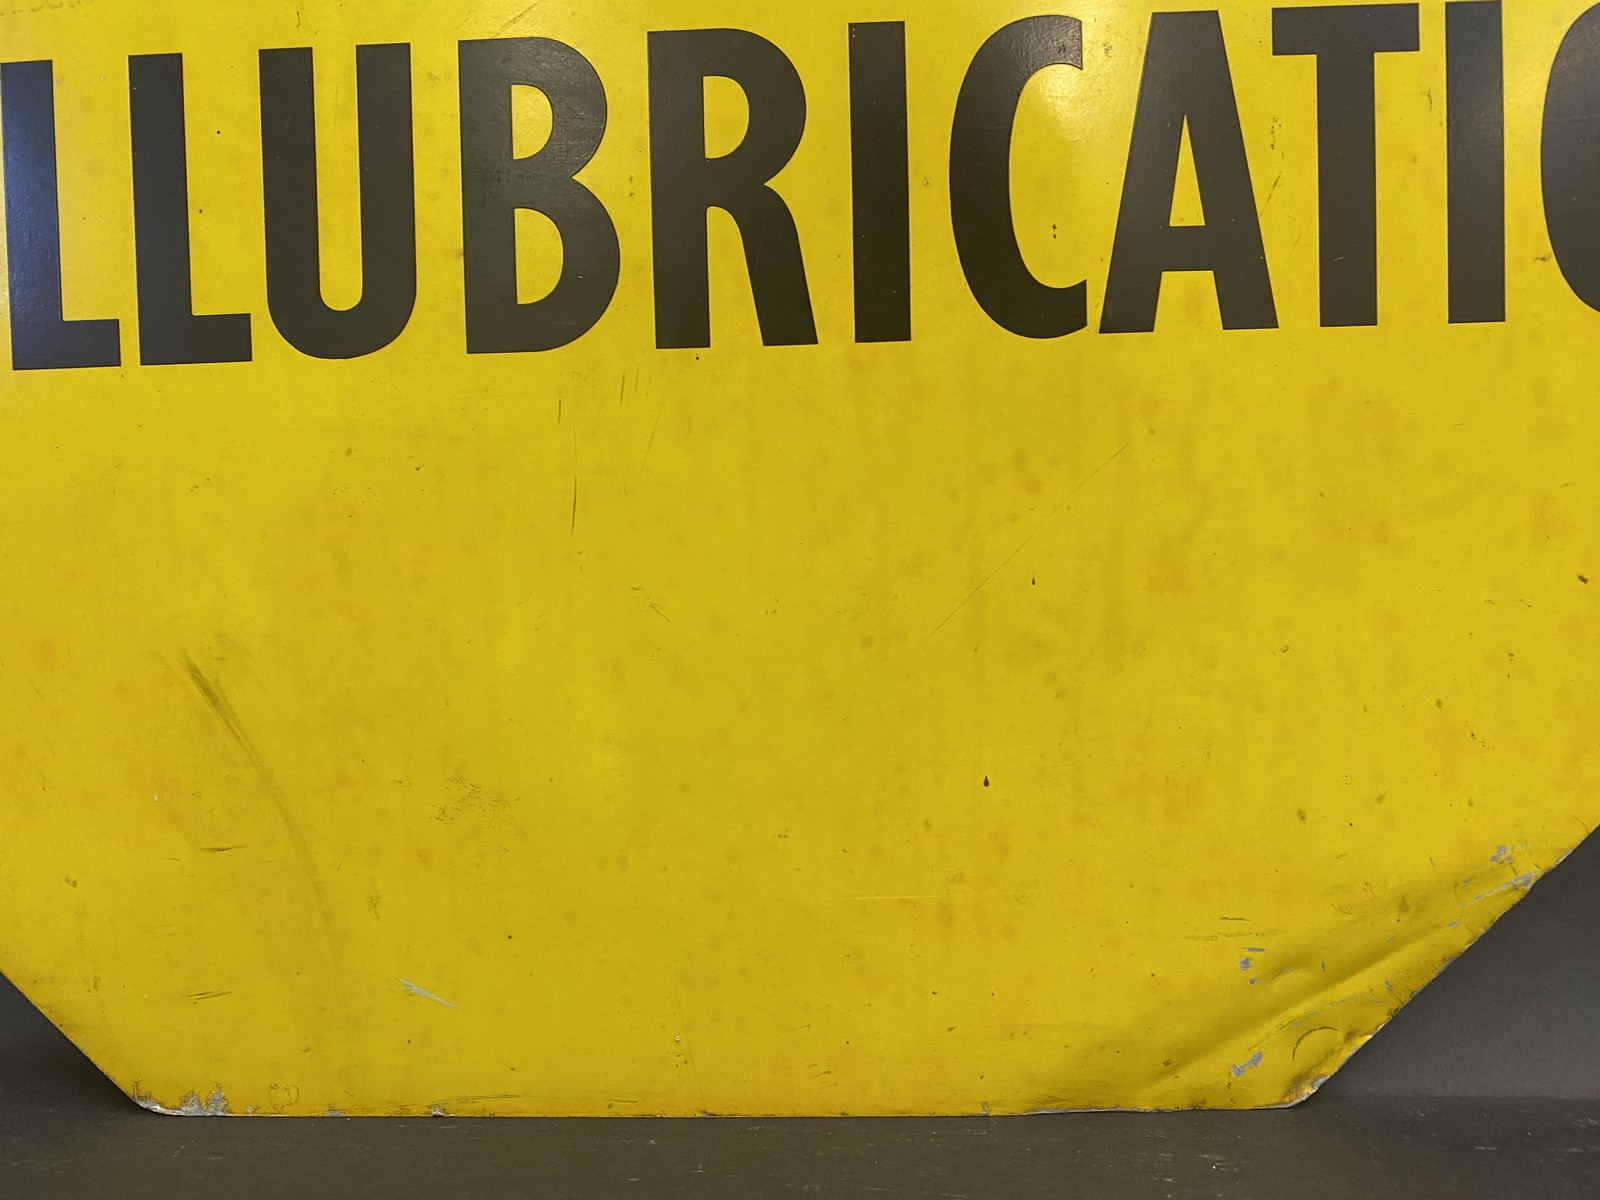 A Shellubrication octagonal tin advertising sign, 34 x 34". - Image 2 of 4